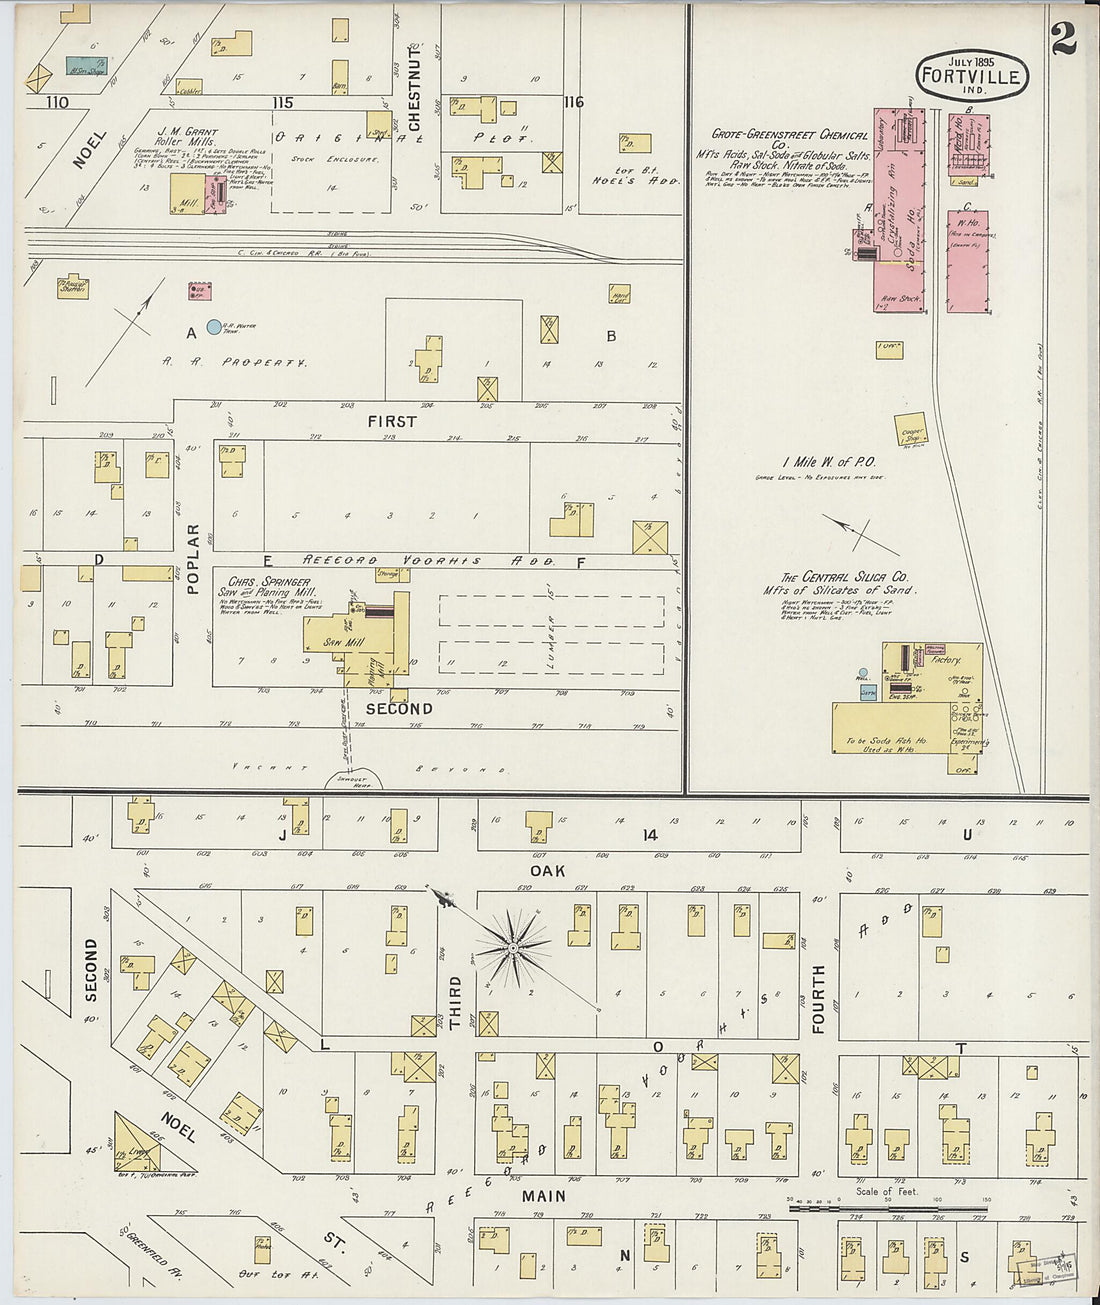 This old map of Fortville, Hancock County, Indiana was created by Sanborn Map Company in 1895